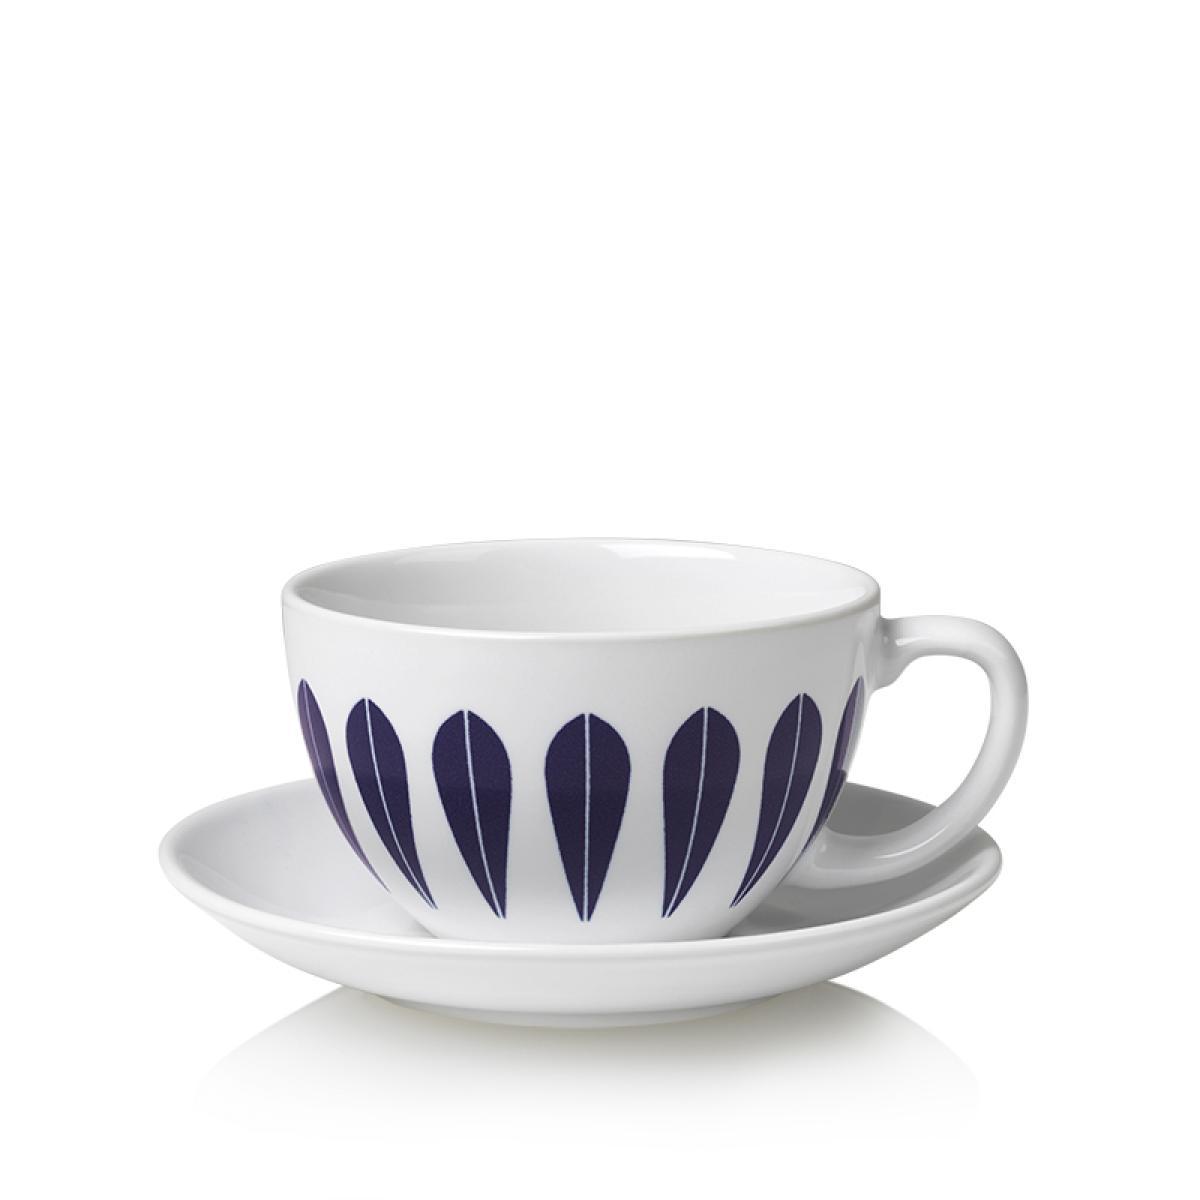 Lucie Kaas Arne Clausen Collection Cups W. Saucer Blue oscuro, 10 cm